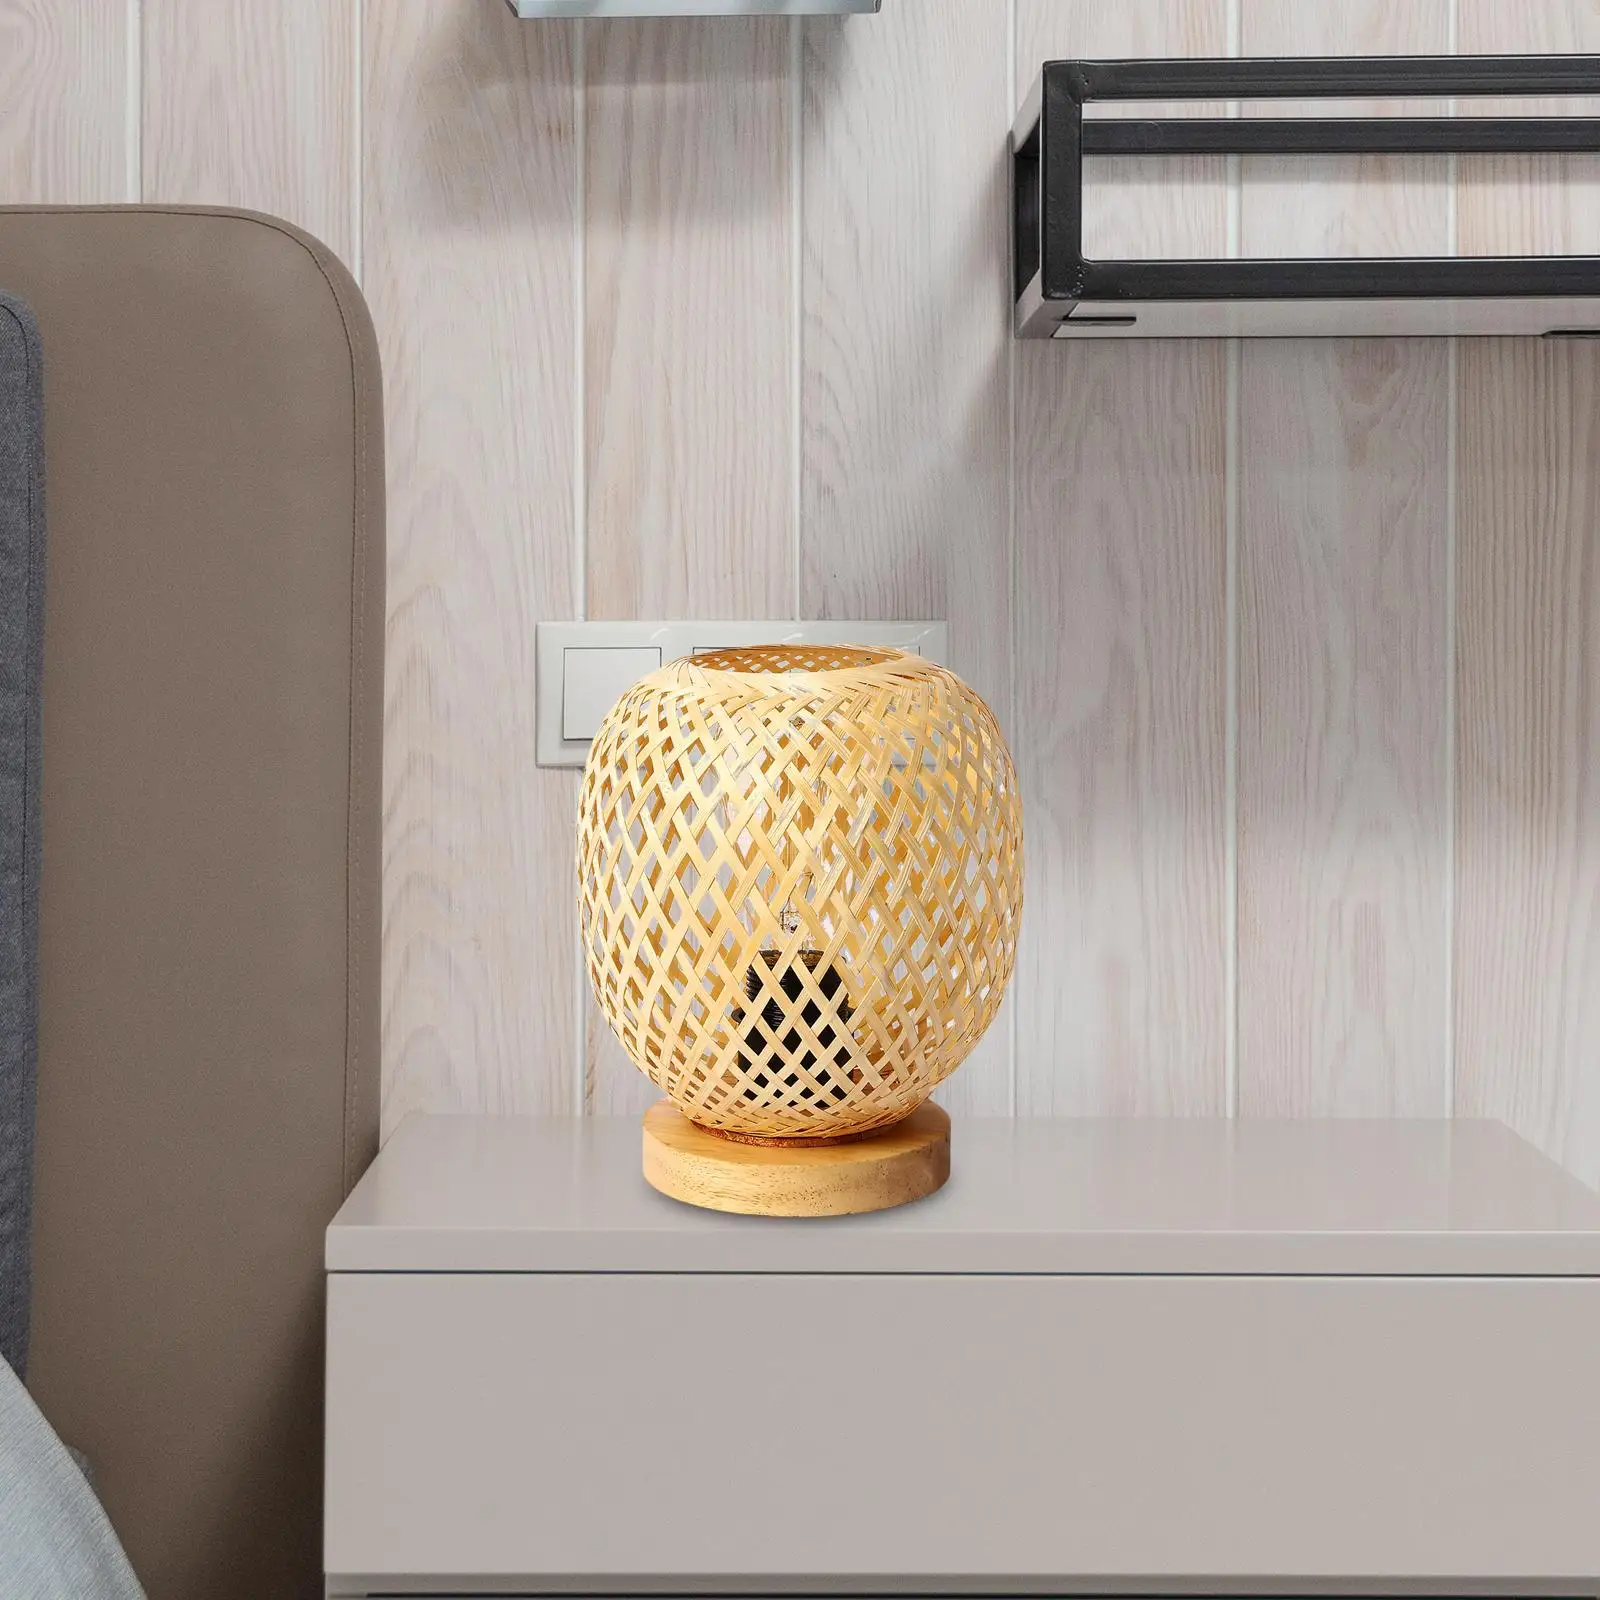 Rattan Table Lamps Night Light Accs Ornament Table Lamp with Wooden Base Simple for Bedroom Home Photography Living US Plug